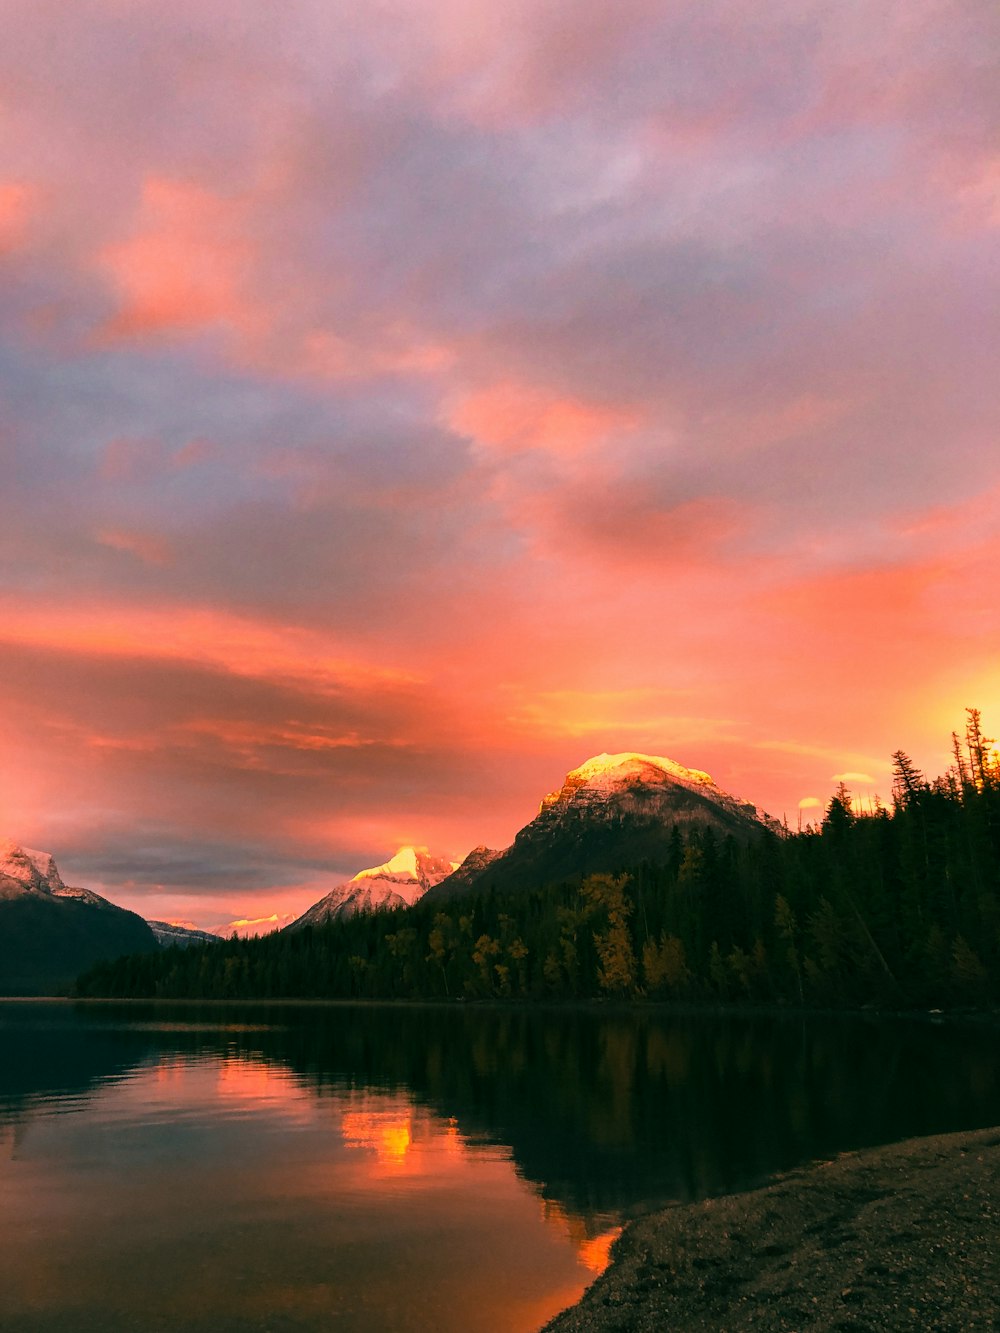 a beautiful sunset over a lake with mountains in the background